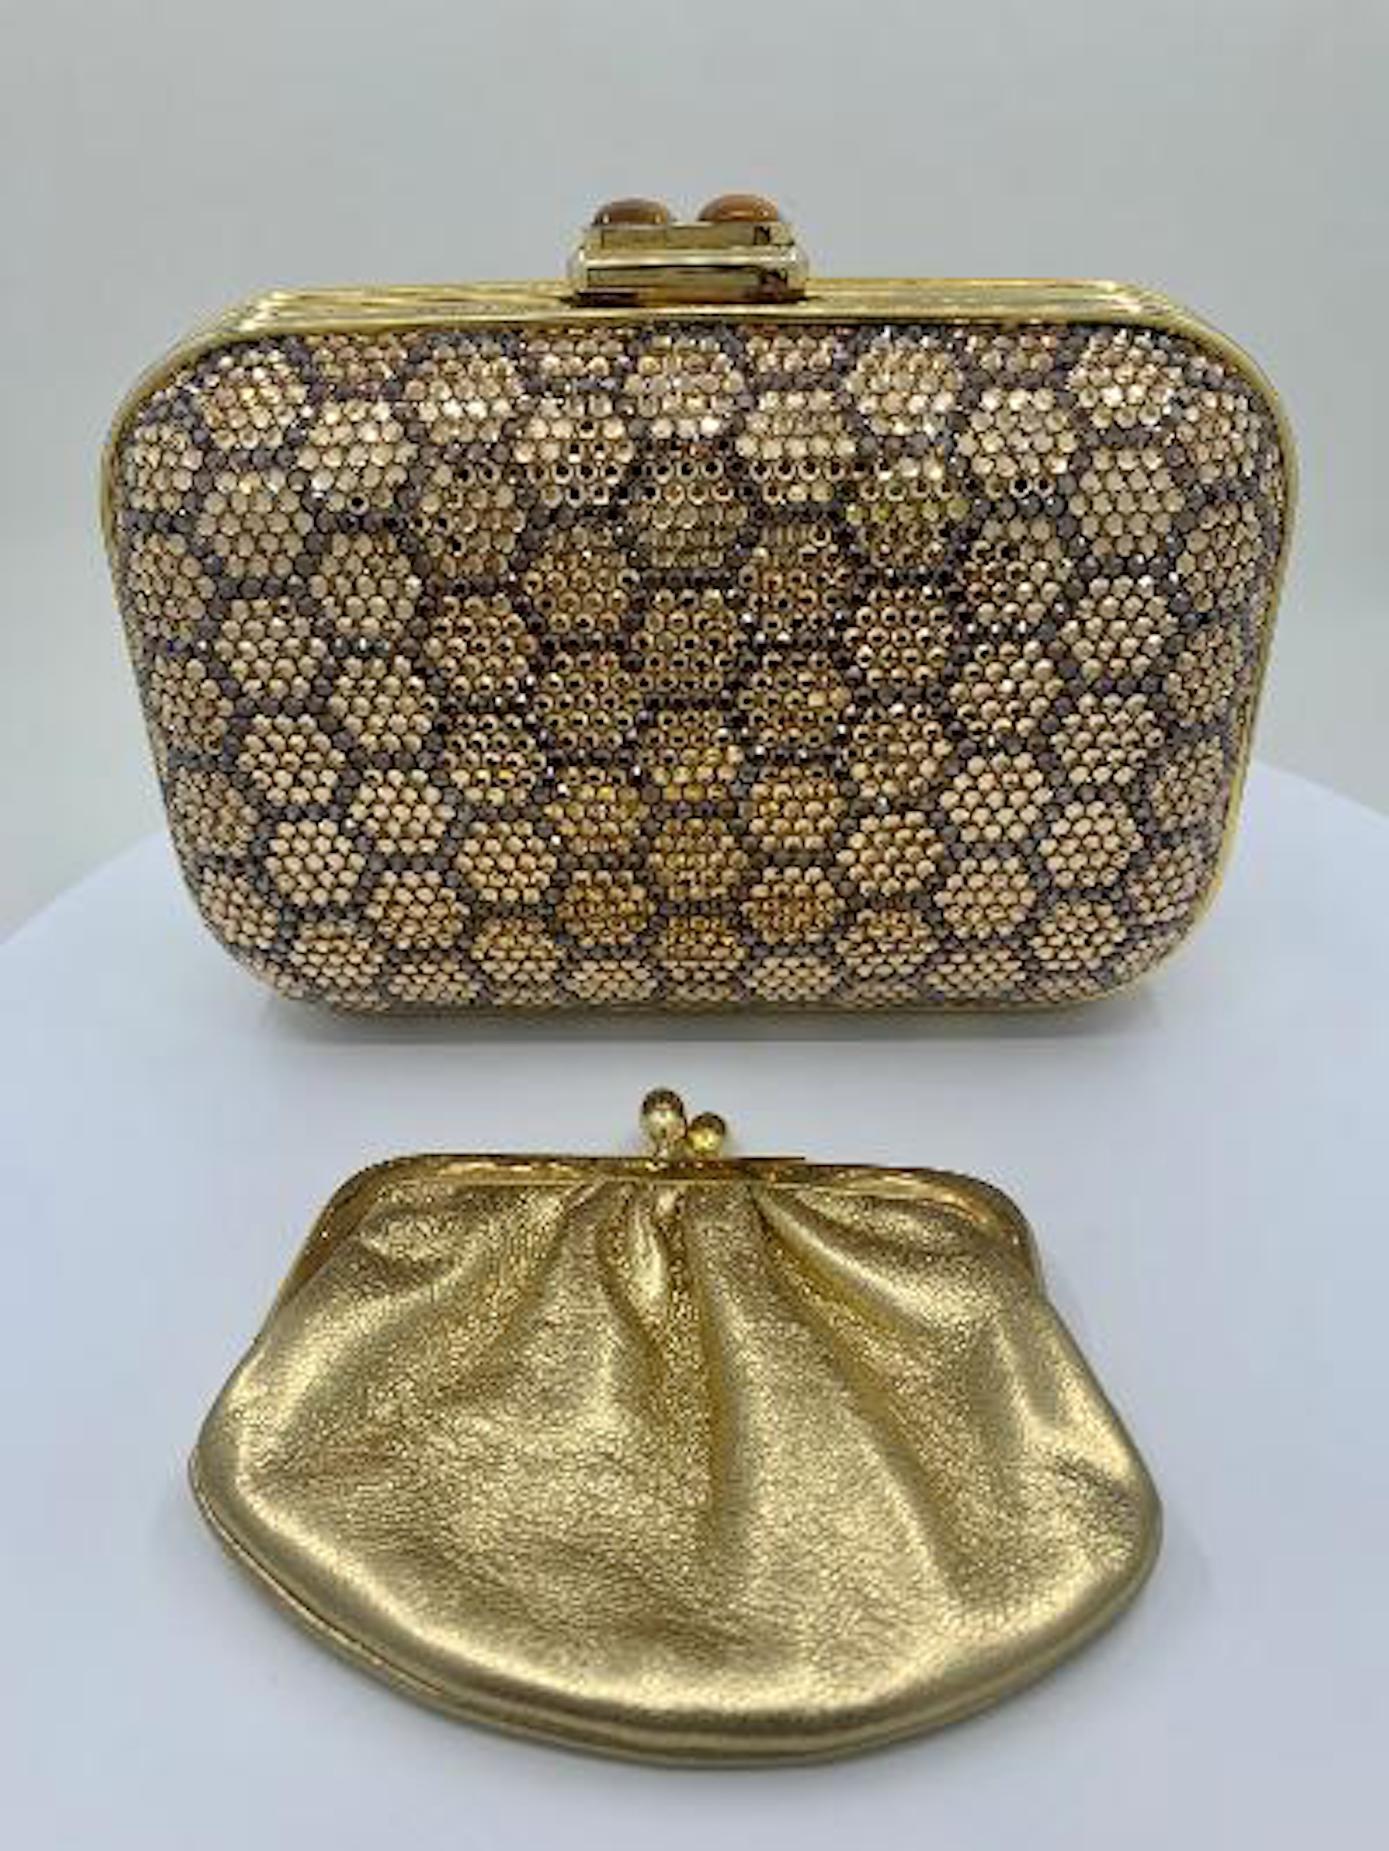 Meet a clutch with real icon status! This timeless and elegant hand made couture designer Judith Leiber rectangular shaped honeycomb pattern minaudiere evening bag or clutch has rounded corners and a gold toned metal frame covered in dazzling silver